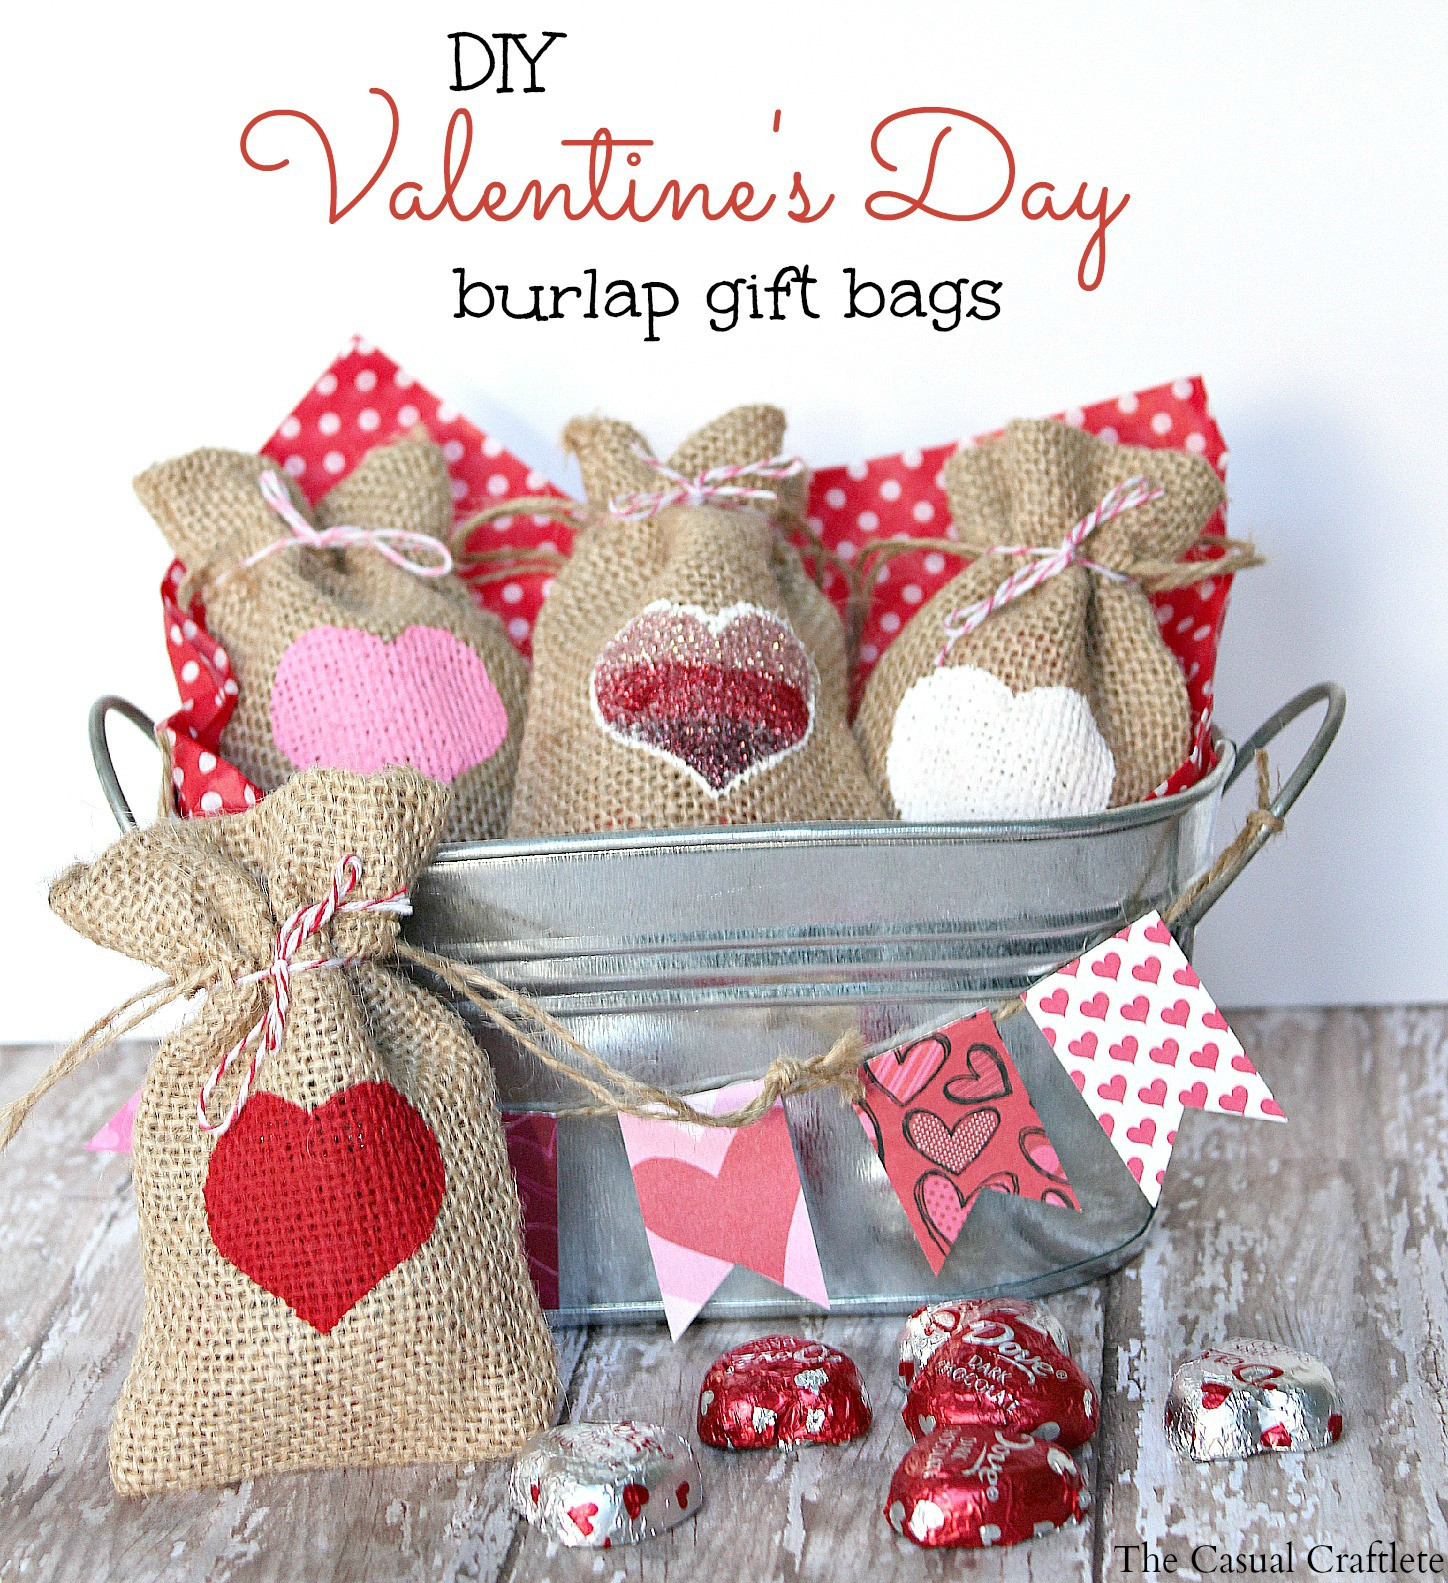 Valentines Day Gift Bags New Diy Valentine S Day Burlap Gift Bags